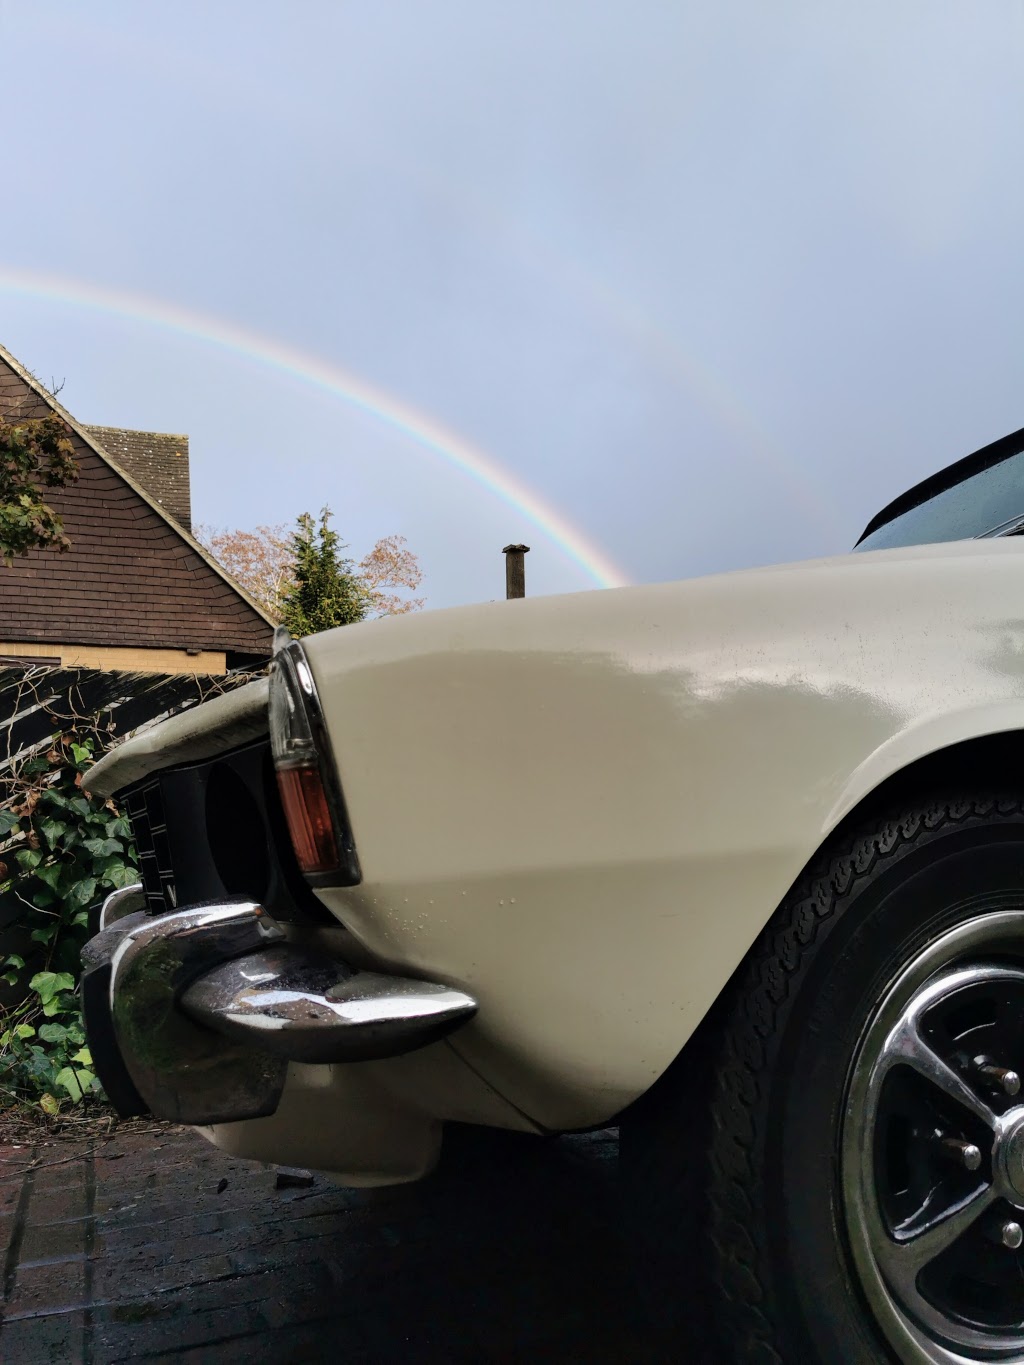 1975 Rover P6 3500 in front of rainbow